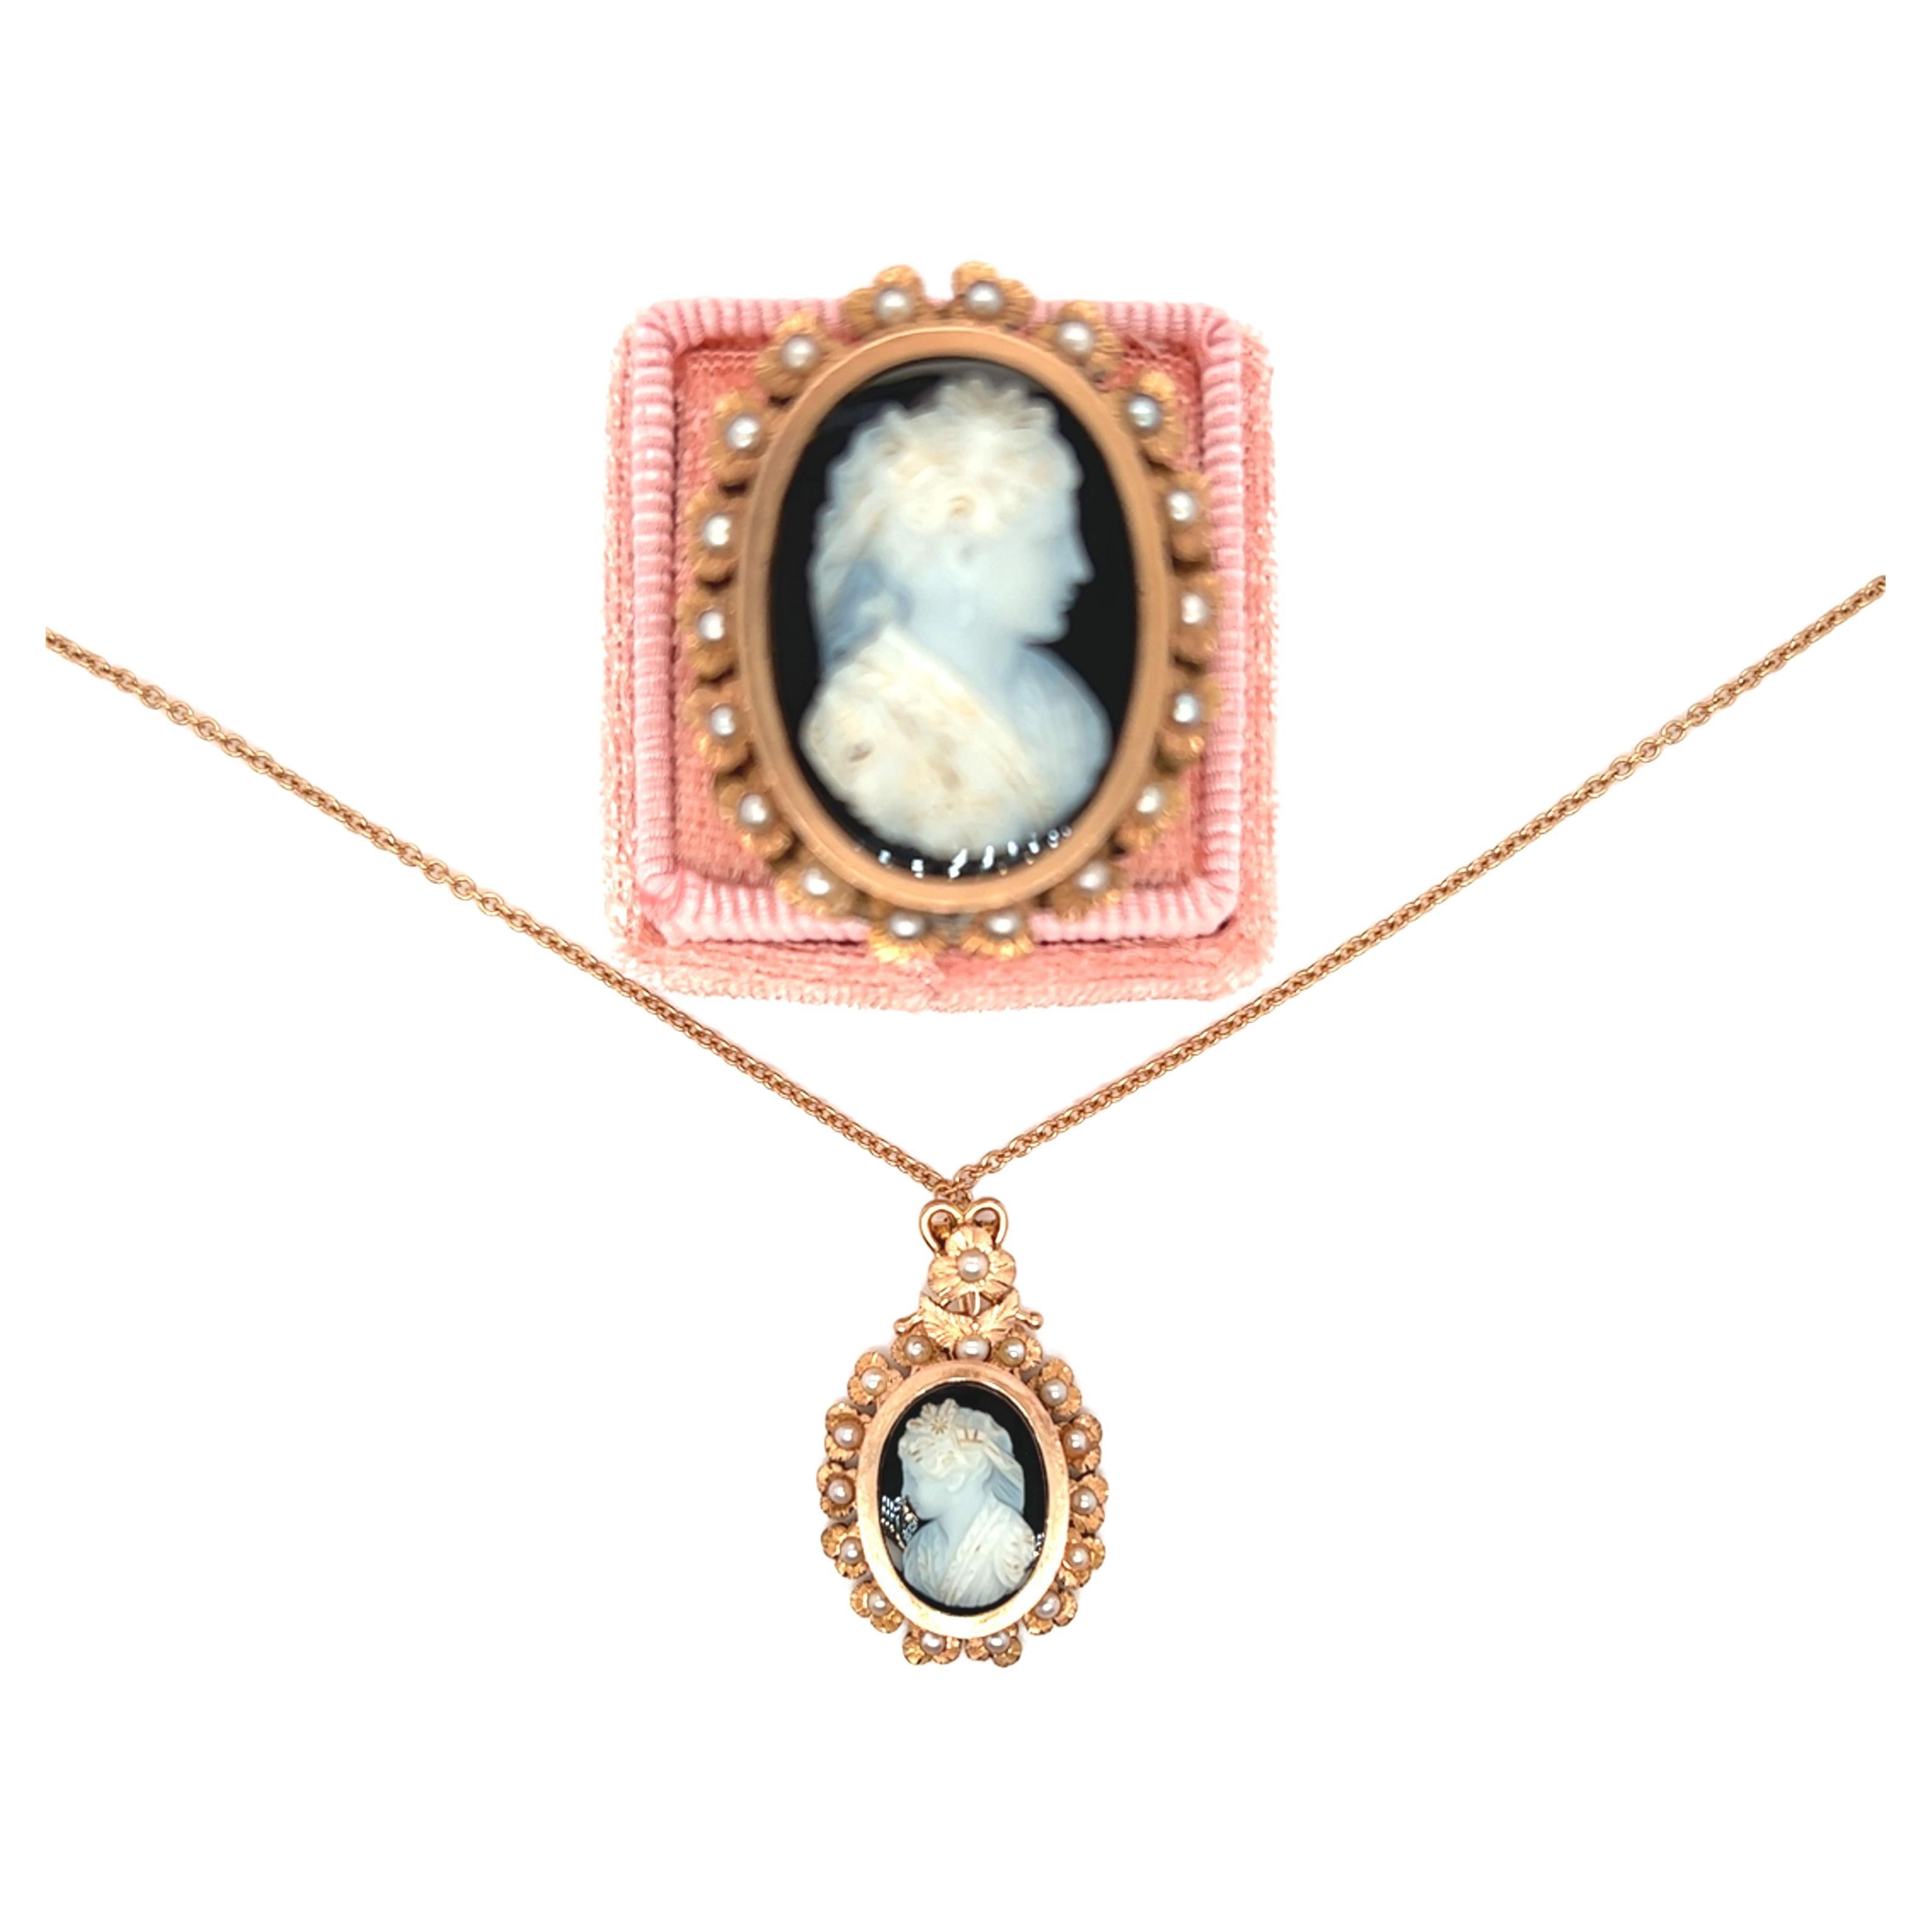 An antique ring and pendant set with a two-layered cameo on onyx,  oval in shape representing the profile of a woman. The ring features a graceful feminine silhouette framed by a captivating halo of three petaled flowers with seed pearl centers.